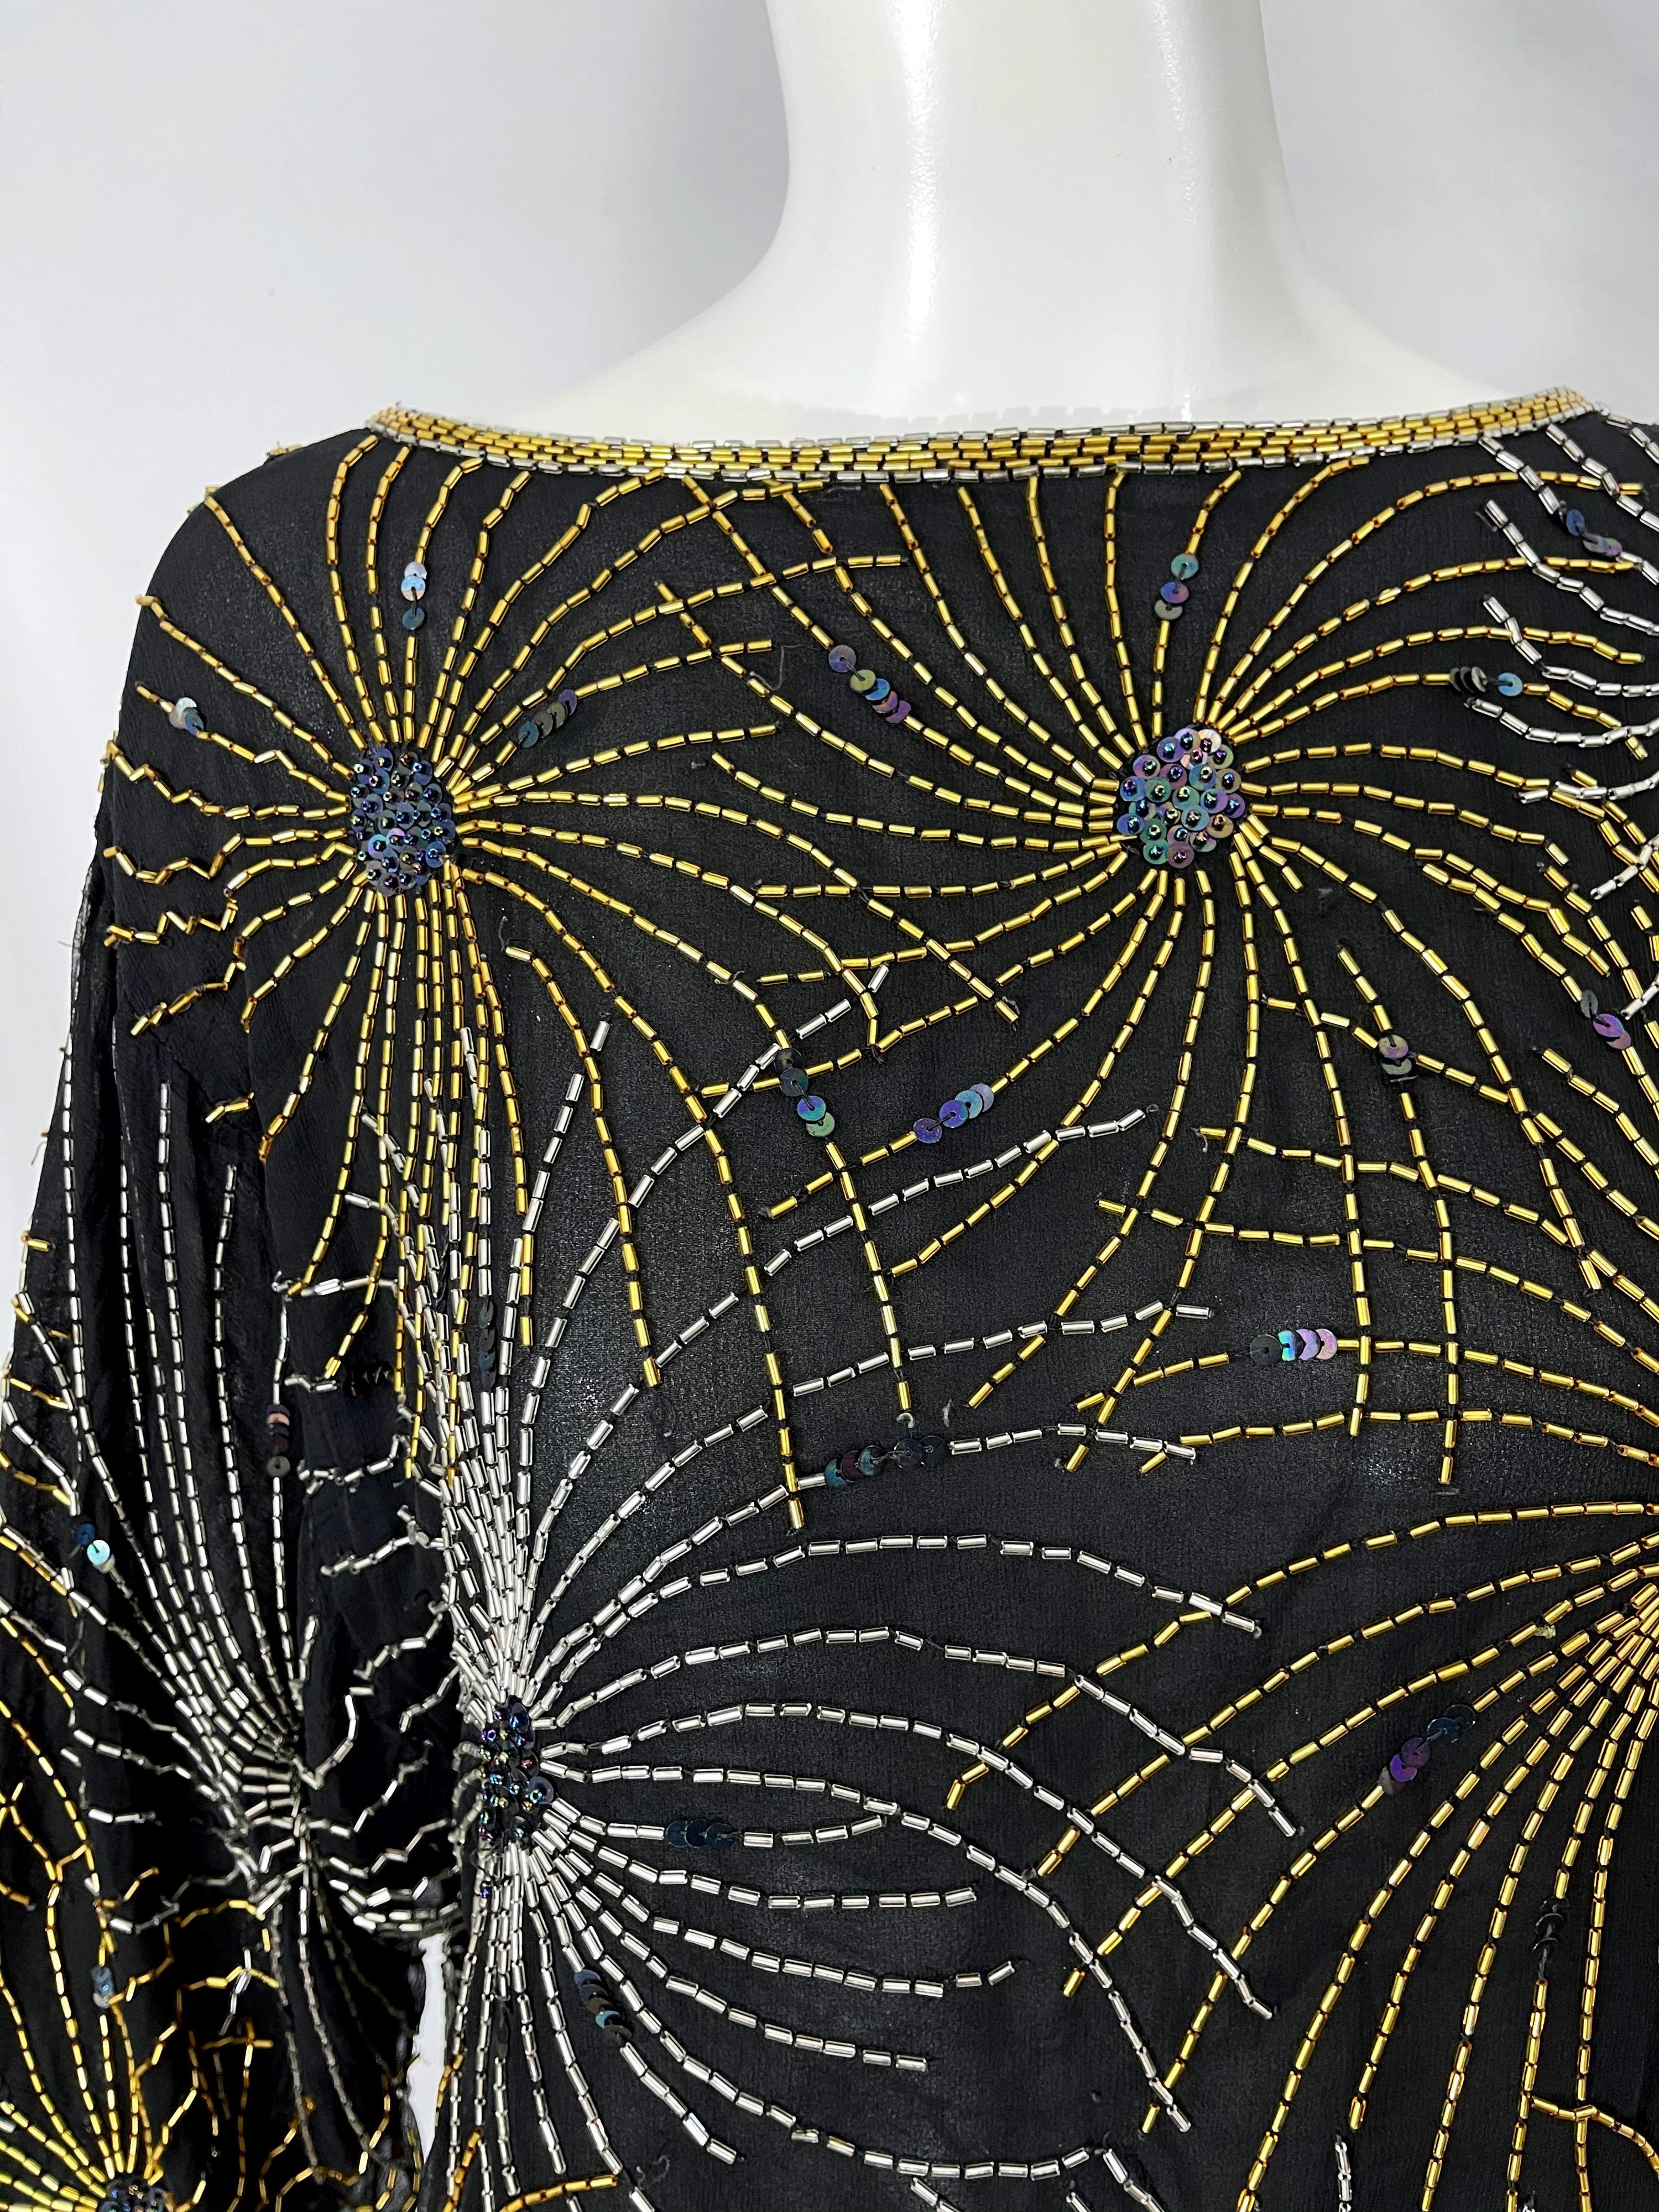 Halston 1970s Iconic Fireworks Beaded Black Silk Chiffon Vintage 70s Blouse Top For Sale 5